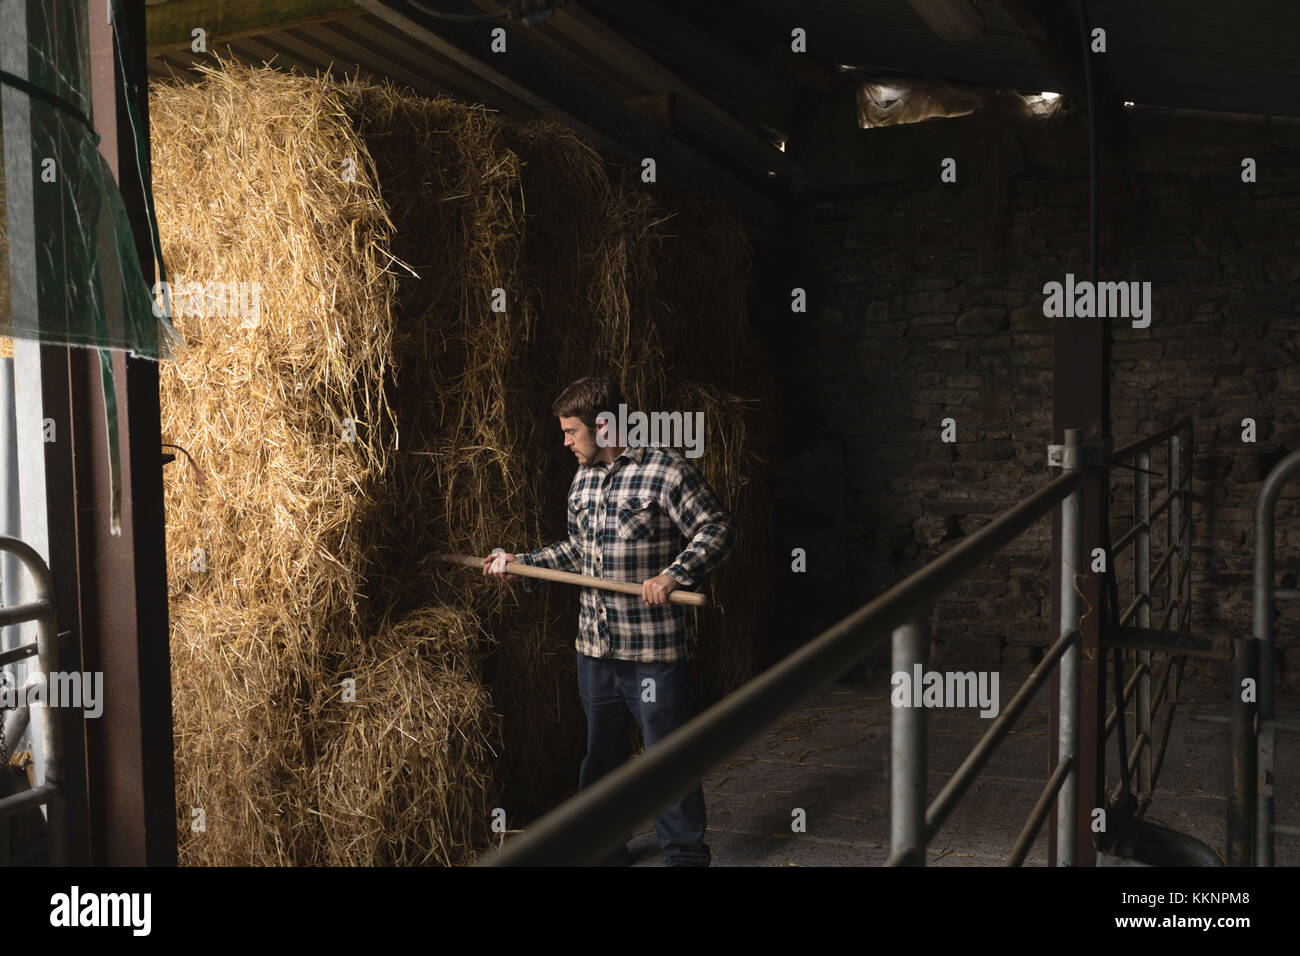 Farmer working in barn Banque D'Images